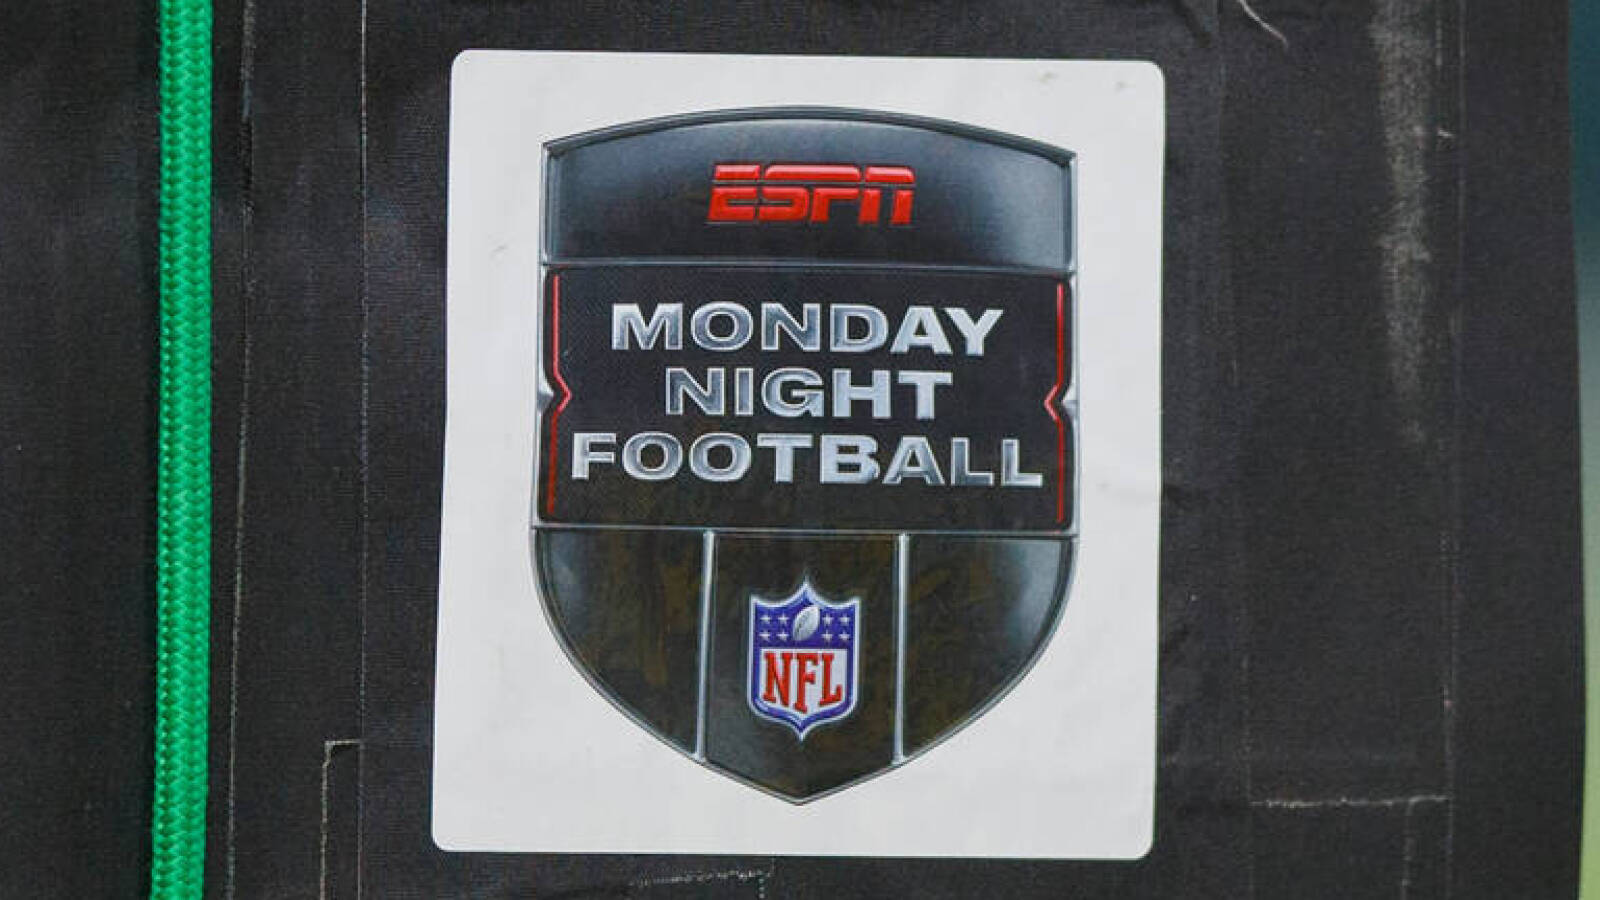 is there a monday nite football game tonight